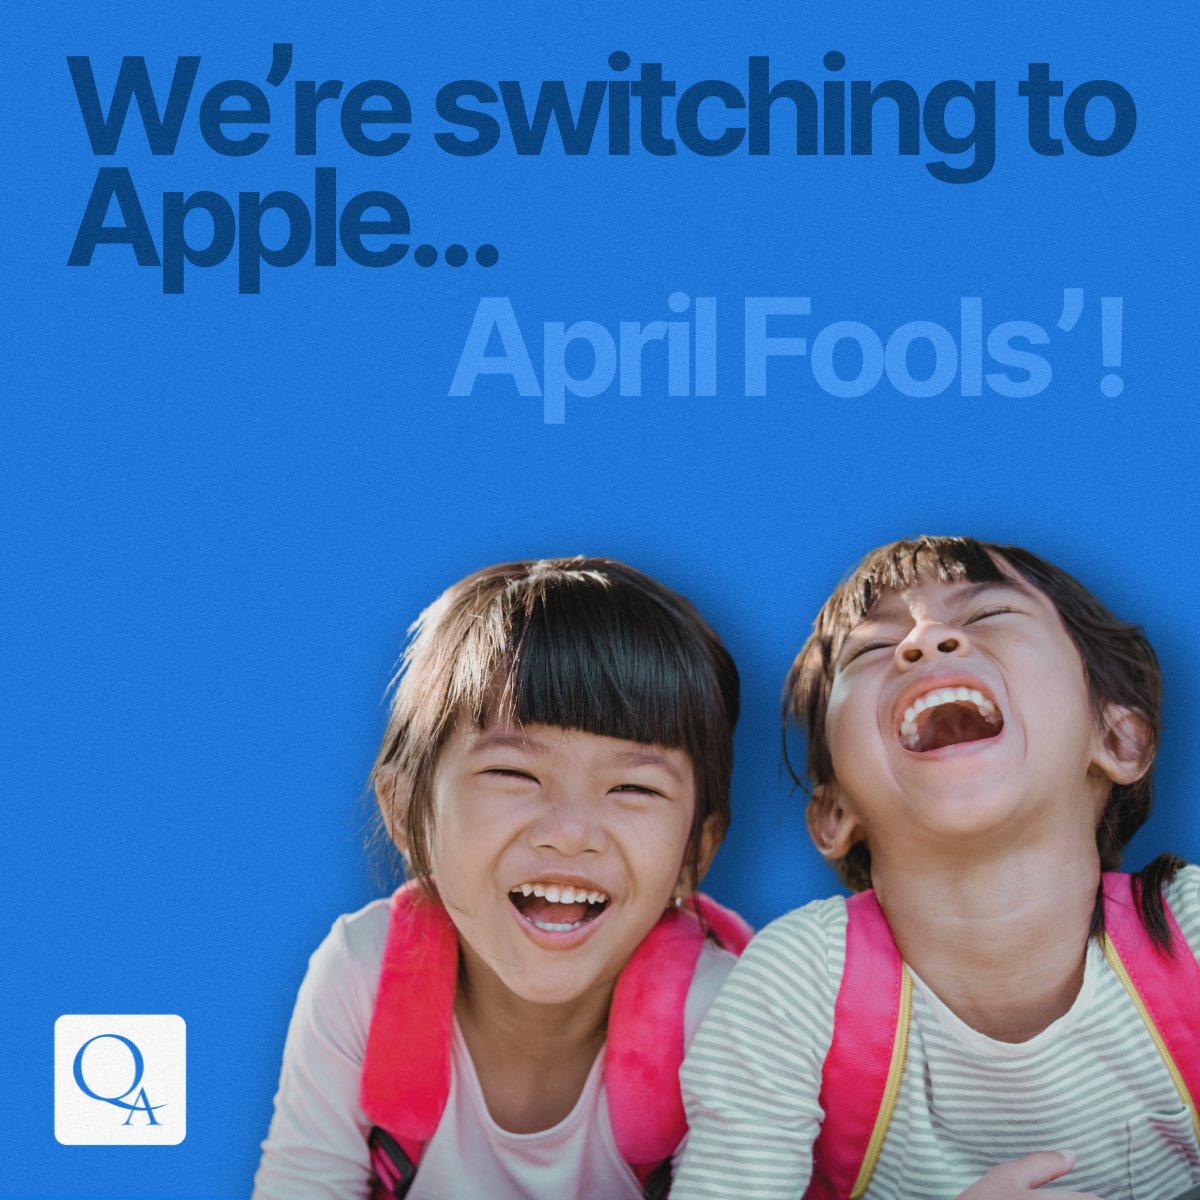 As a leading Solutions Partner, our loyalty is forever locked on Microsoft! 

We believe in fostering a fun company culture. Share some laughs today, because a bit of humor goes a long way! 

Happy April Fools' Day! 

#Workculturematters